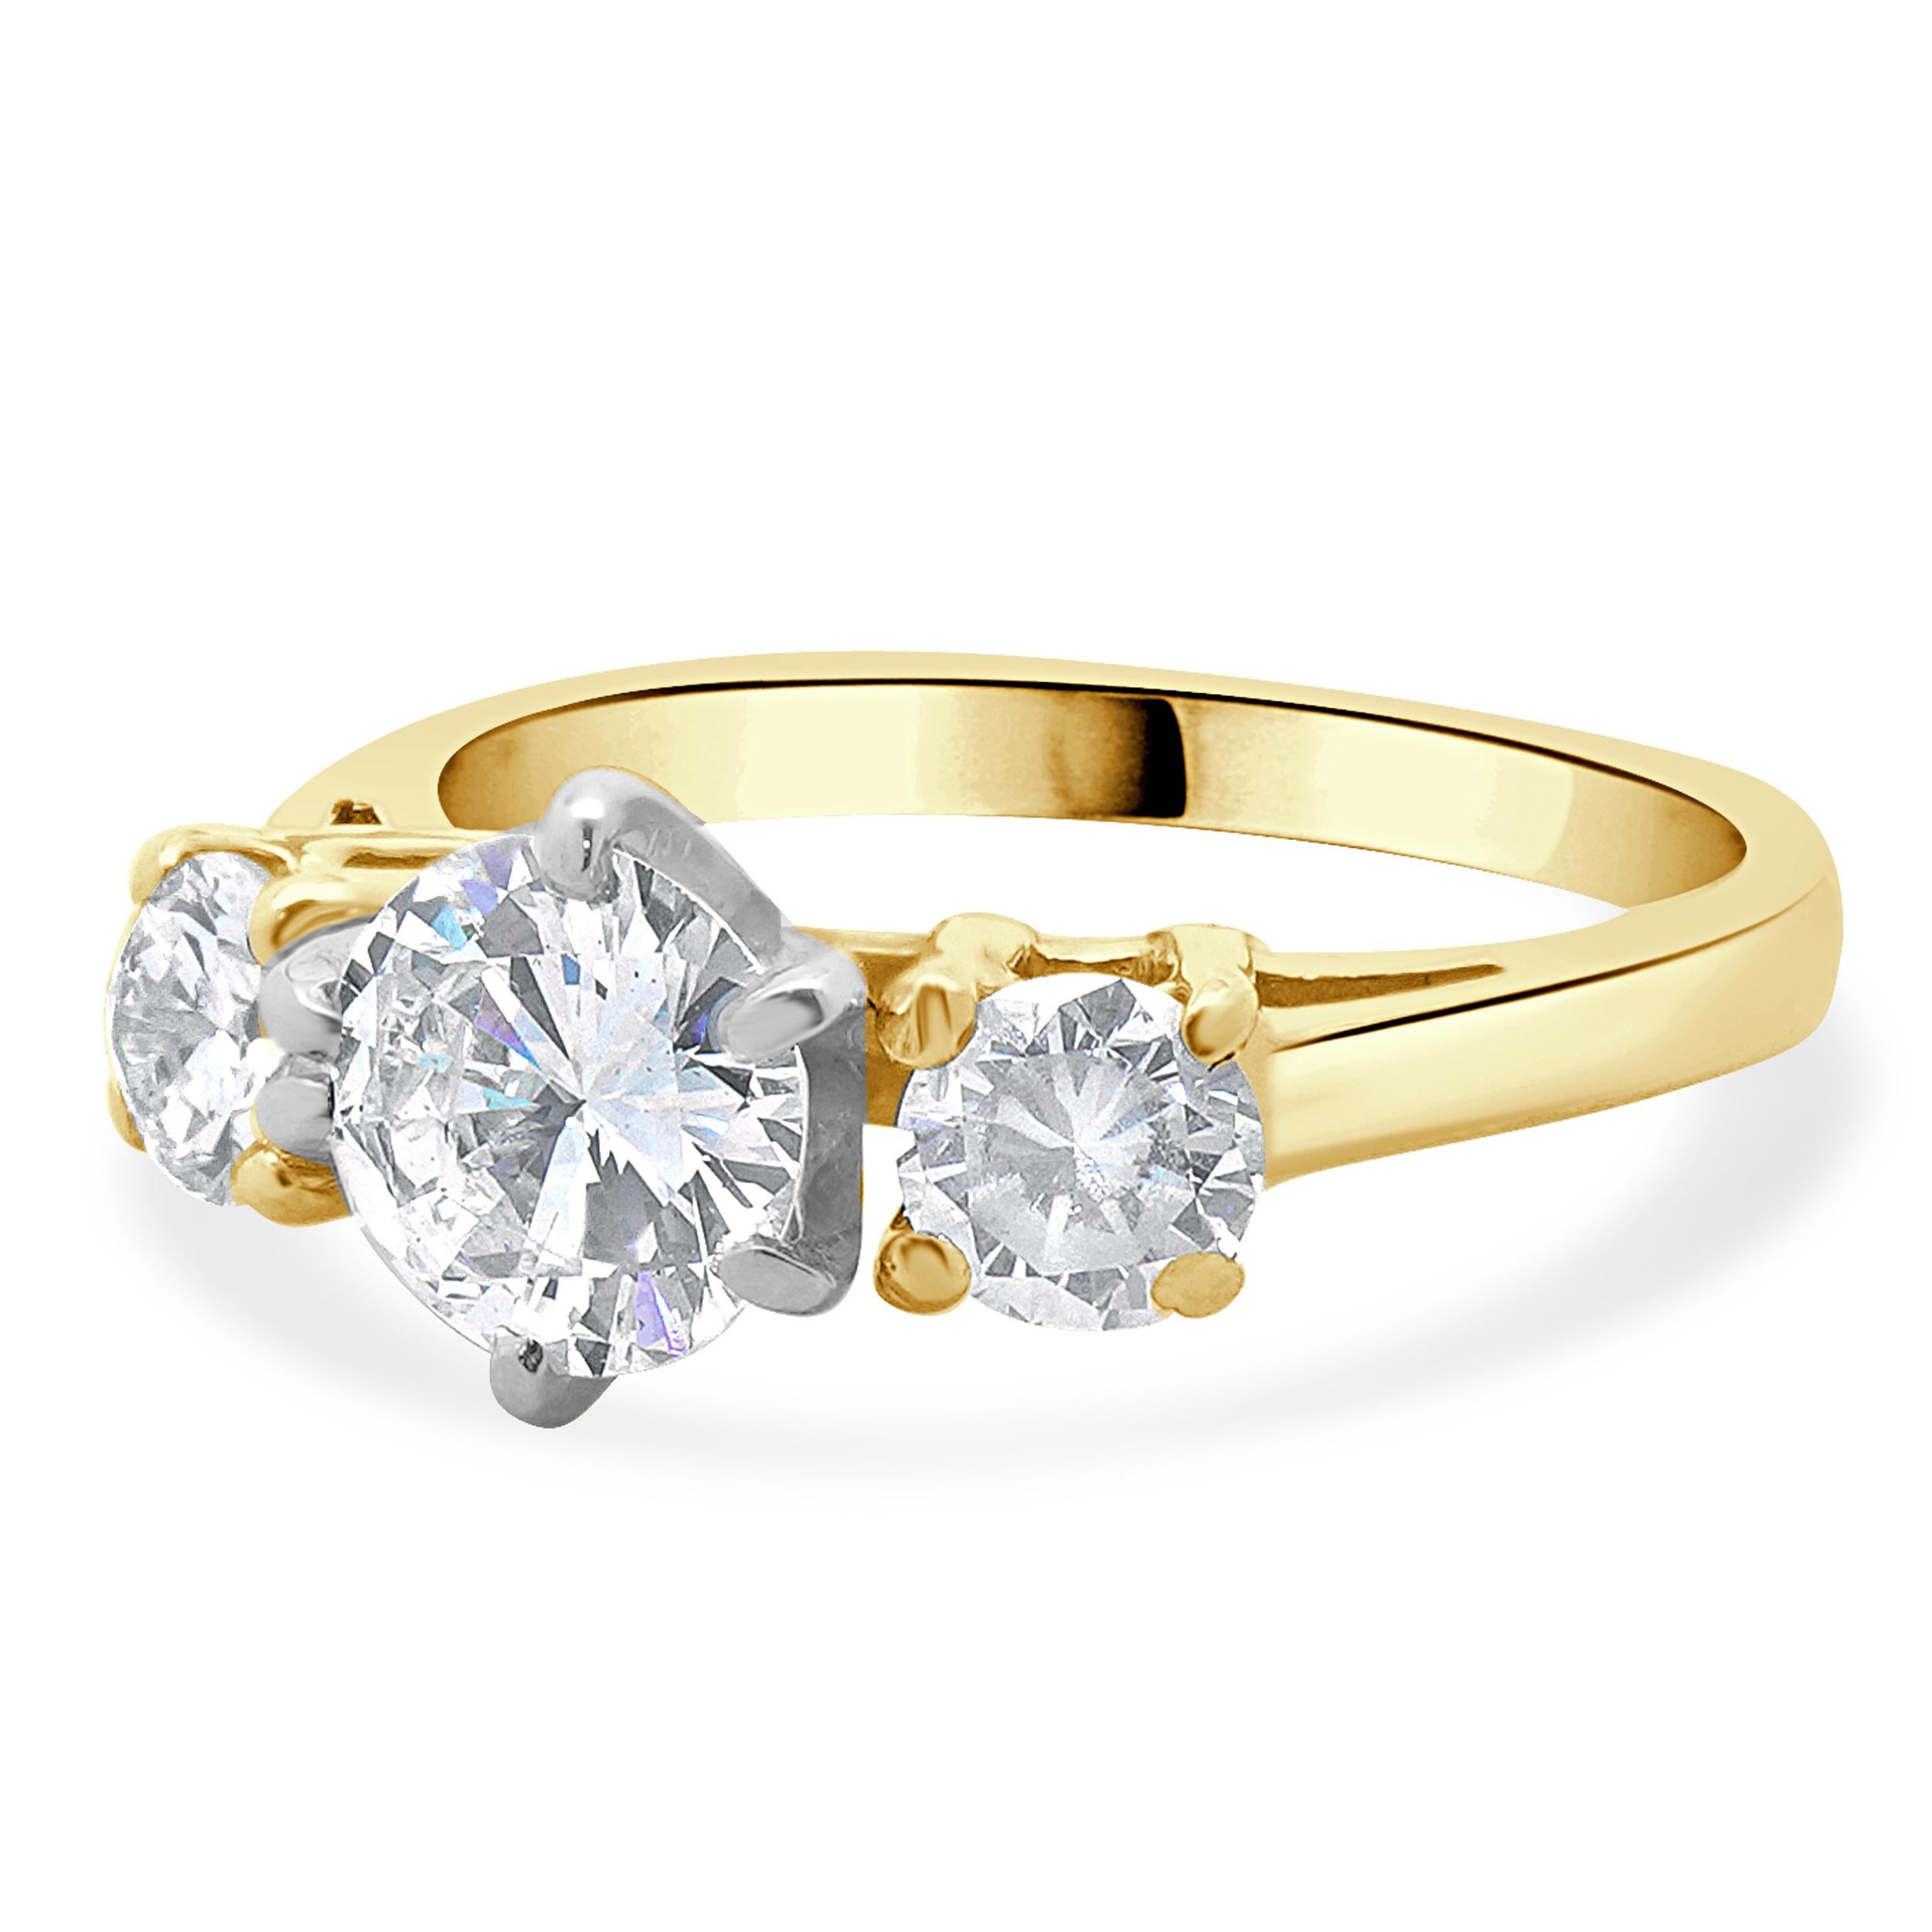 Designer: custom design
Material: 14K yellow gold
Center Diamond: 1 round brilliant cut = 0.80ct
Color : G
Clarity : VS2
Diamond: 2 round brilliant cut = 0.40cttw
Color : G
Clarity : SI1
Dimensions: ring top measures 7.5mm
Size: 4.25 complimentary